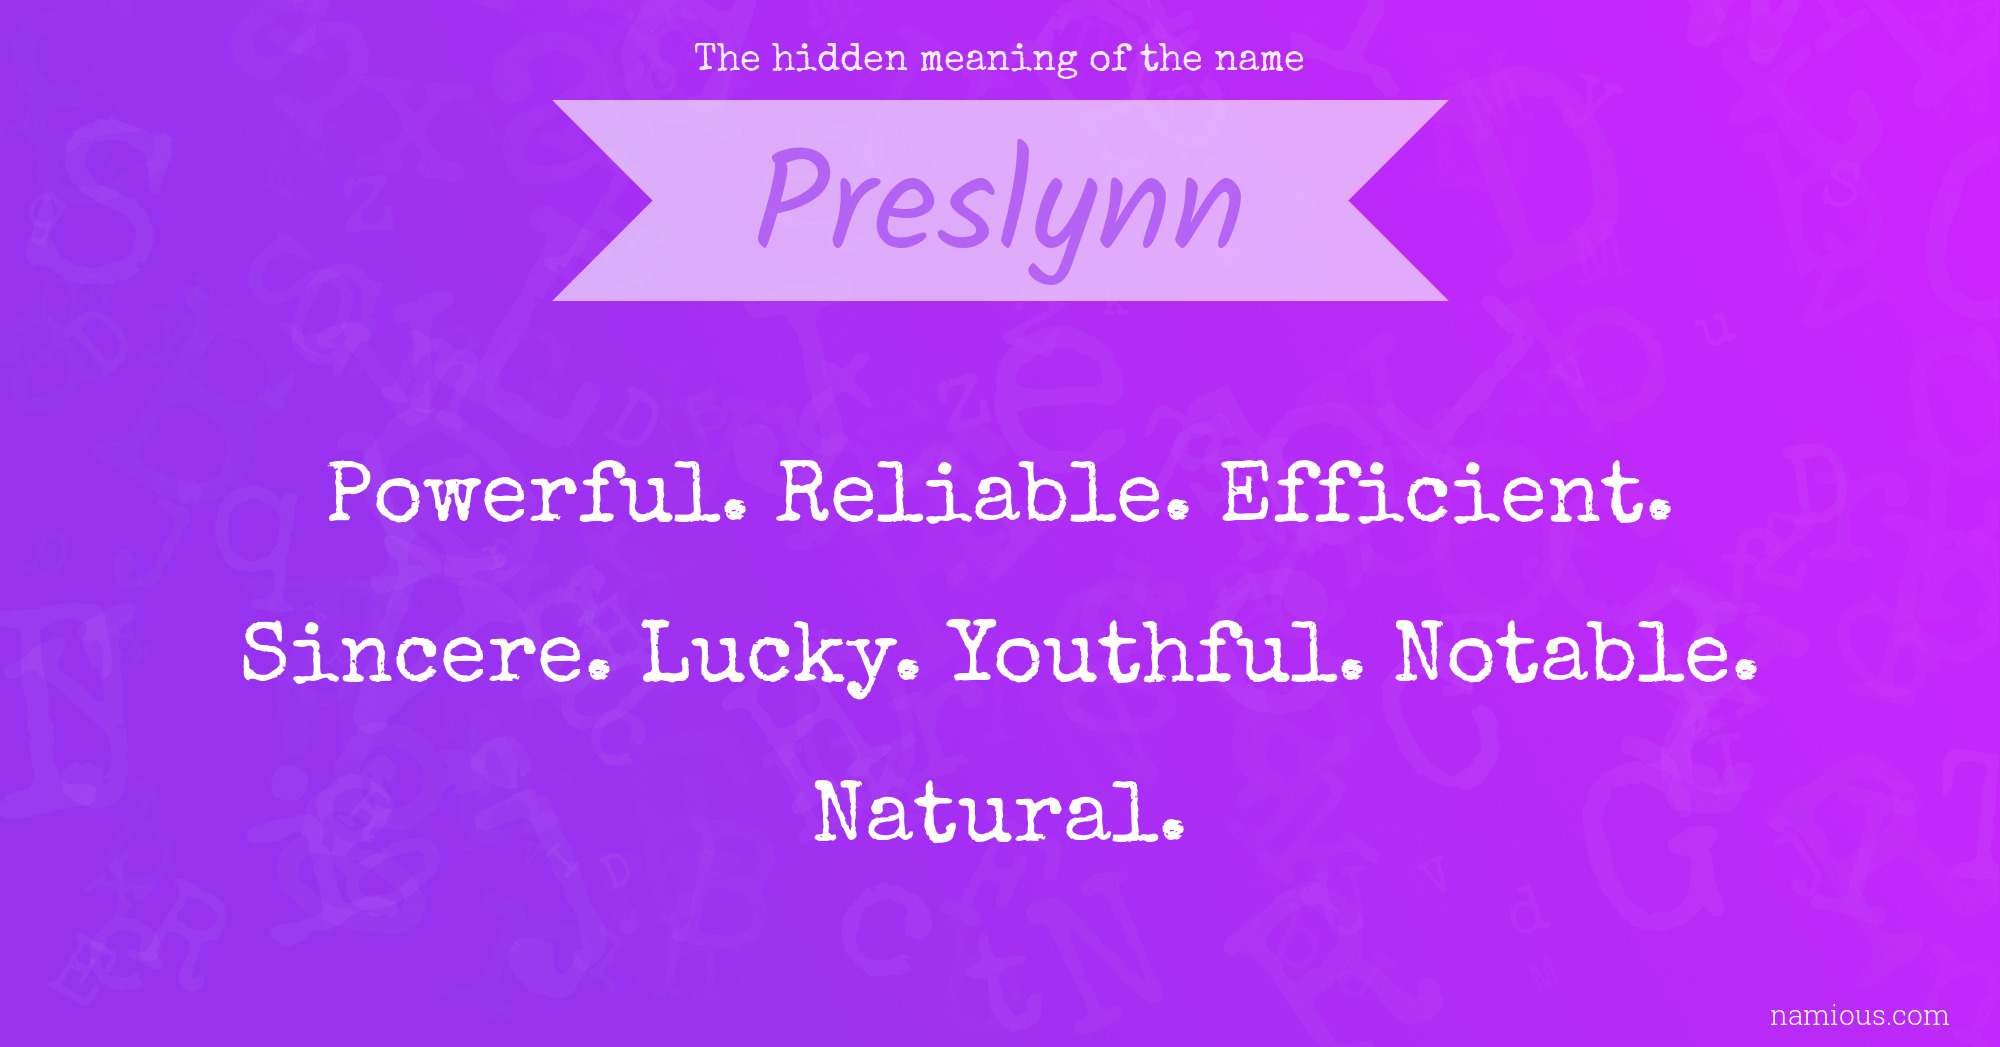 The hidden meaning of the name Preslynn